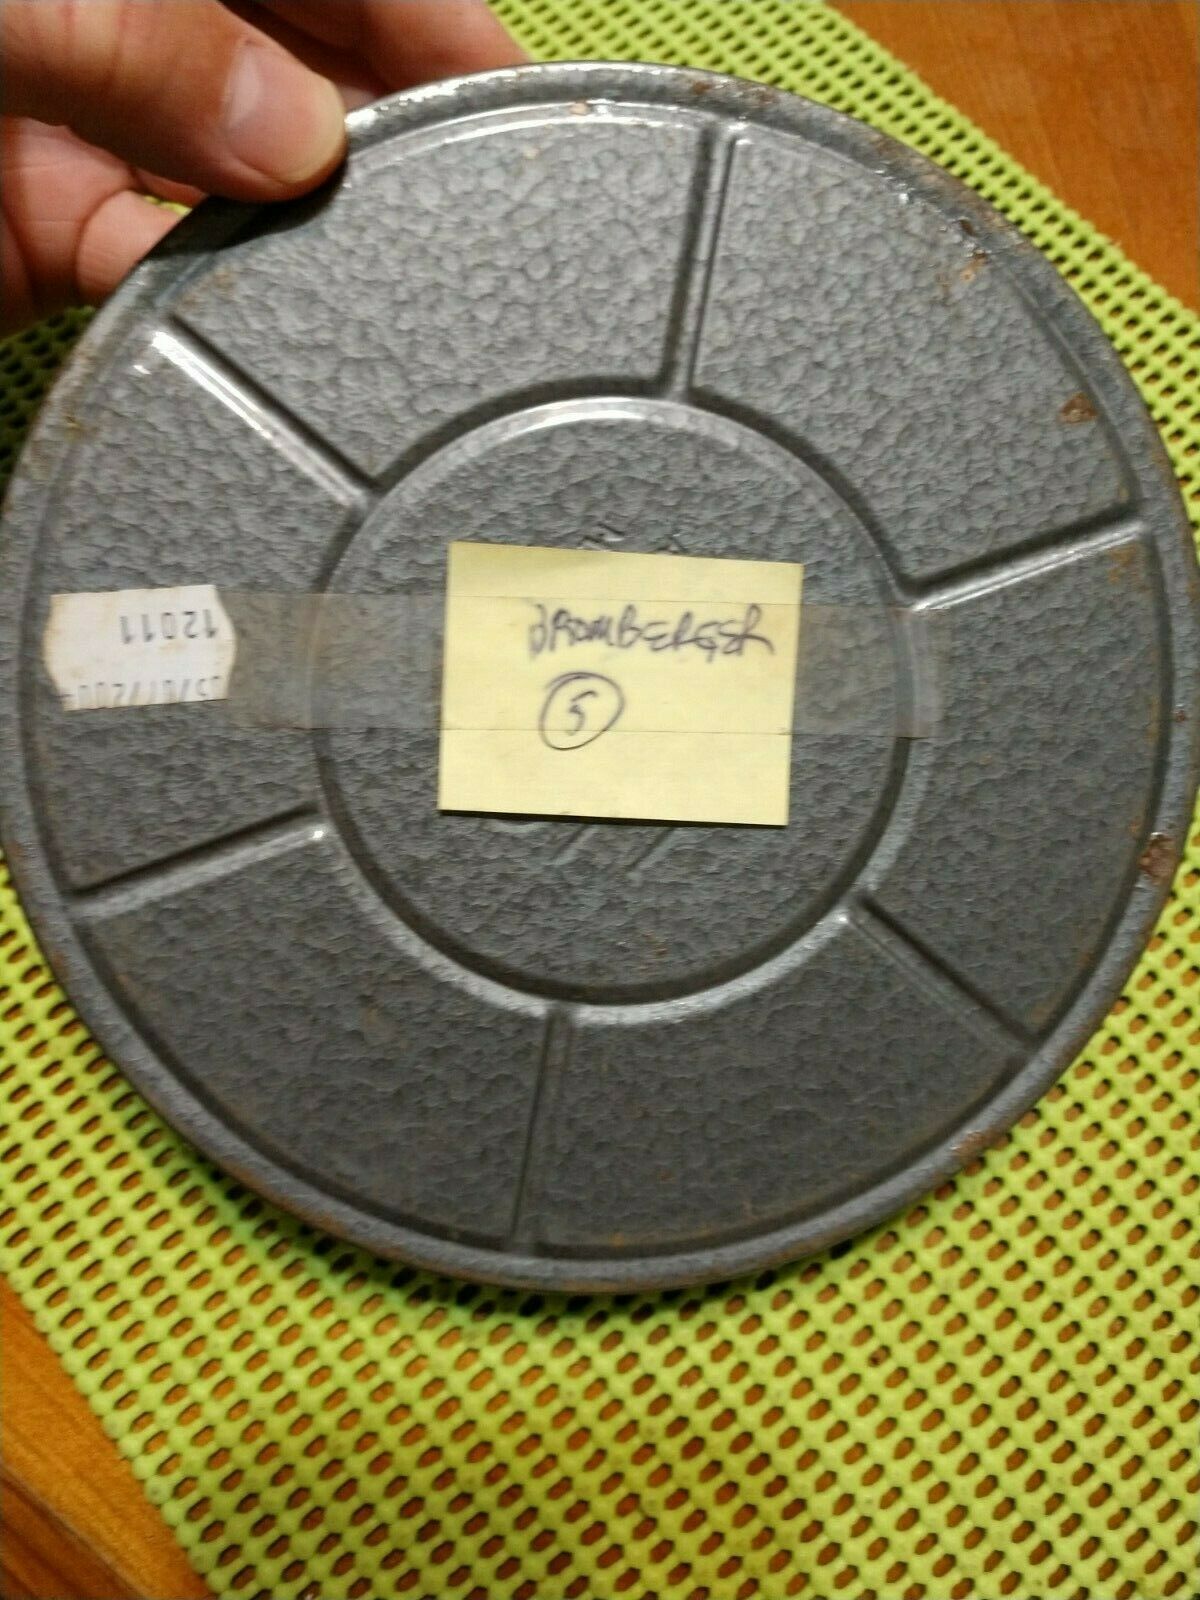 Canister Of Film / Home Movie? Estate Find. Bromberger ? Could Be Historical? 05